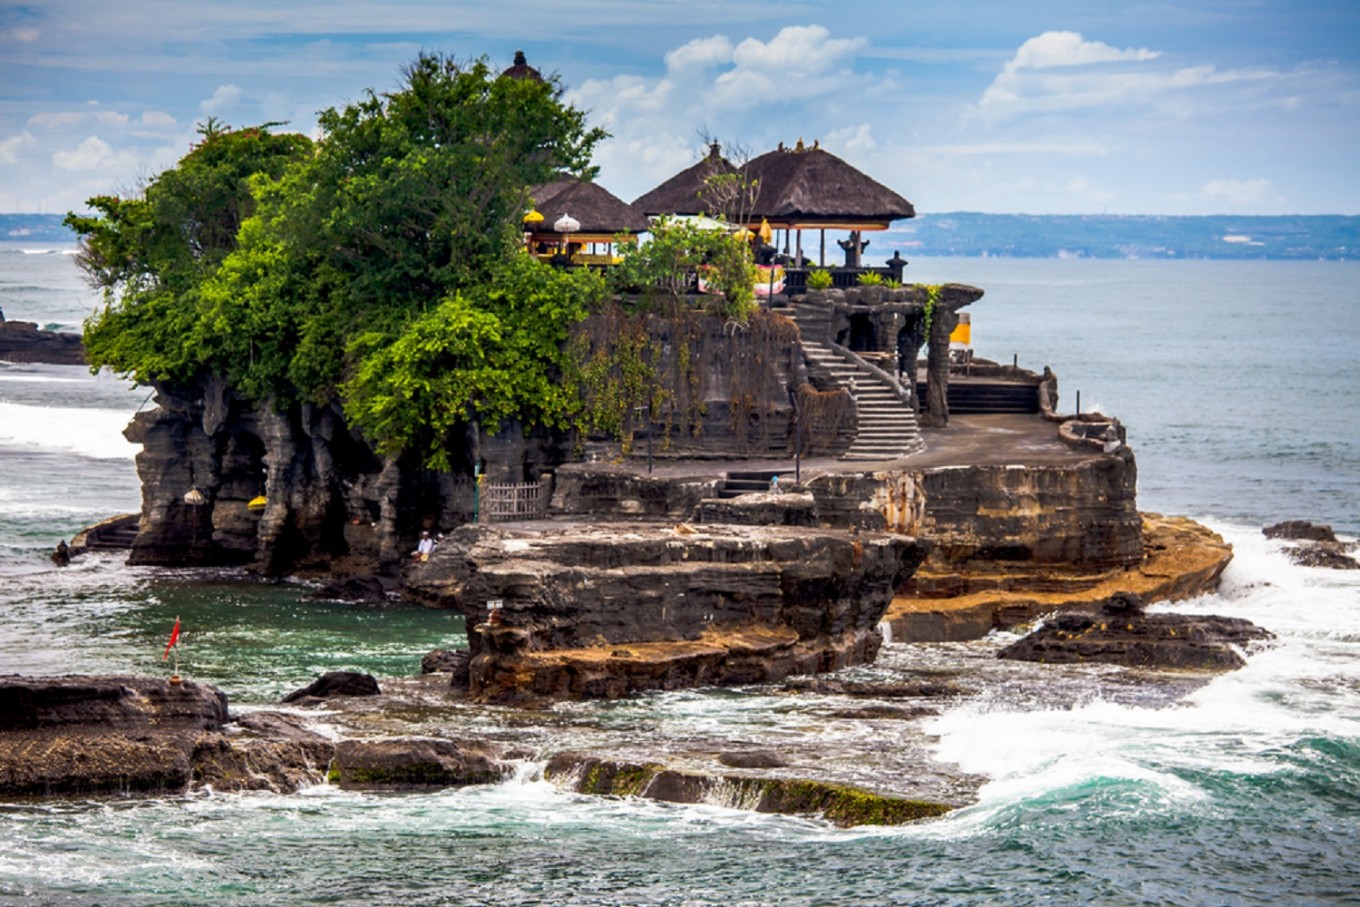 More Indian tourists travel to Bali - News - The Jakarta Post